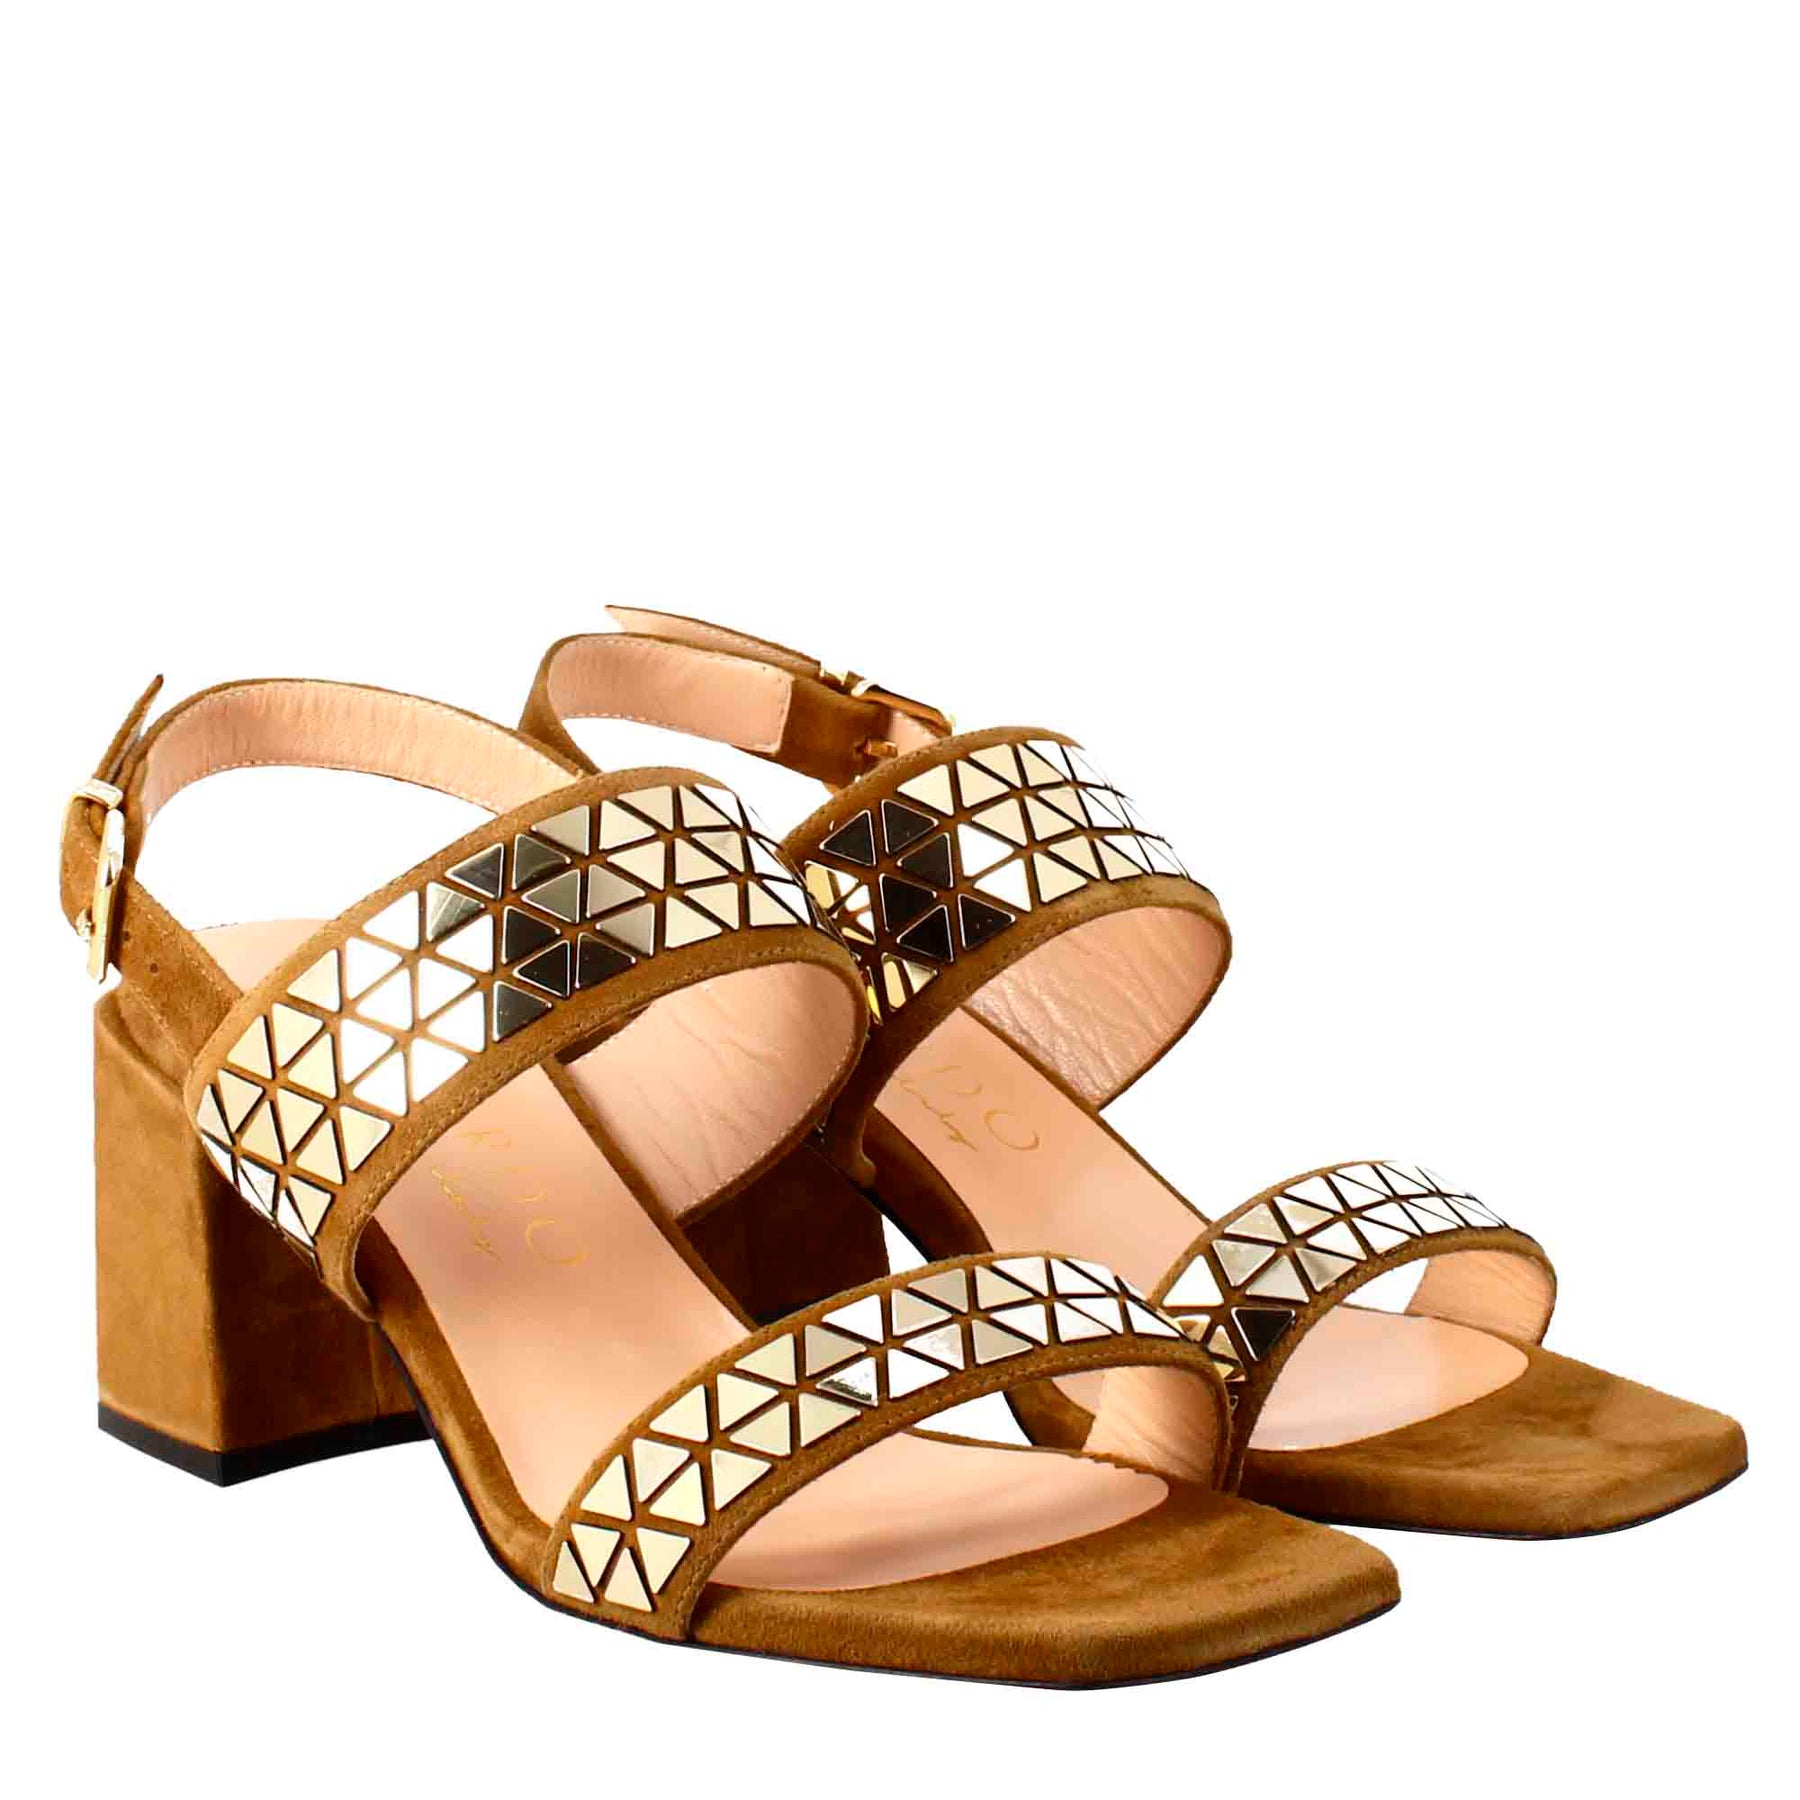 Women's sandal in brown suede with applied glitter 